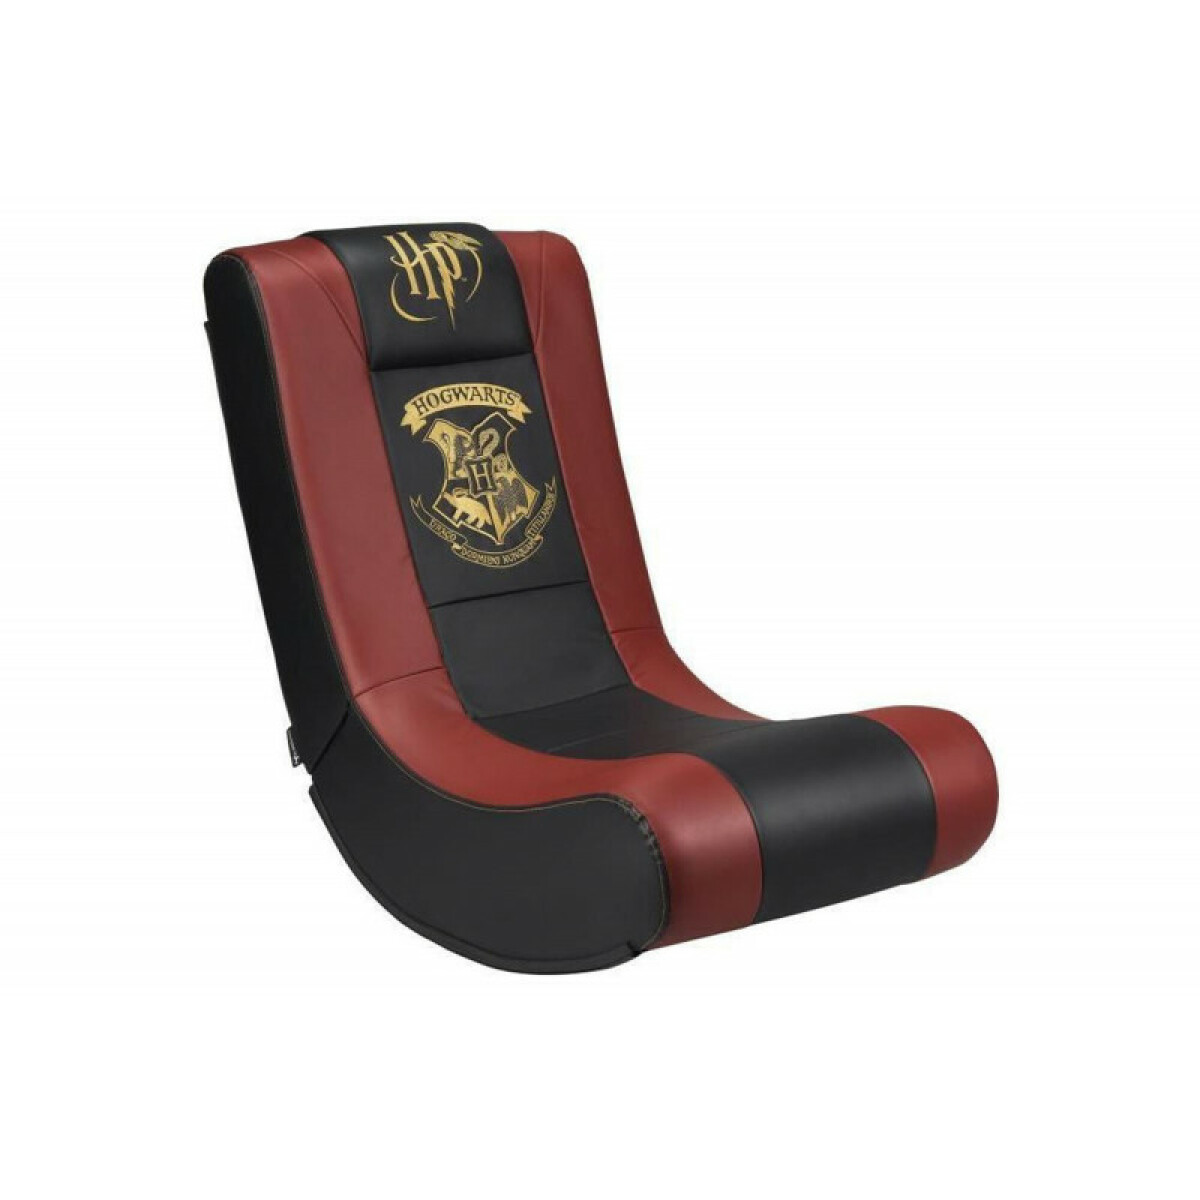 Chaise gamer Subsonic Siège Subsonic Pro Rock n Seat Harry Potter Rouge et noir